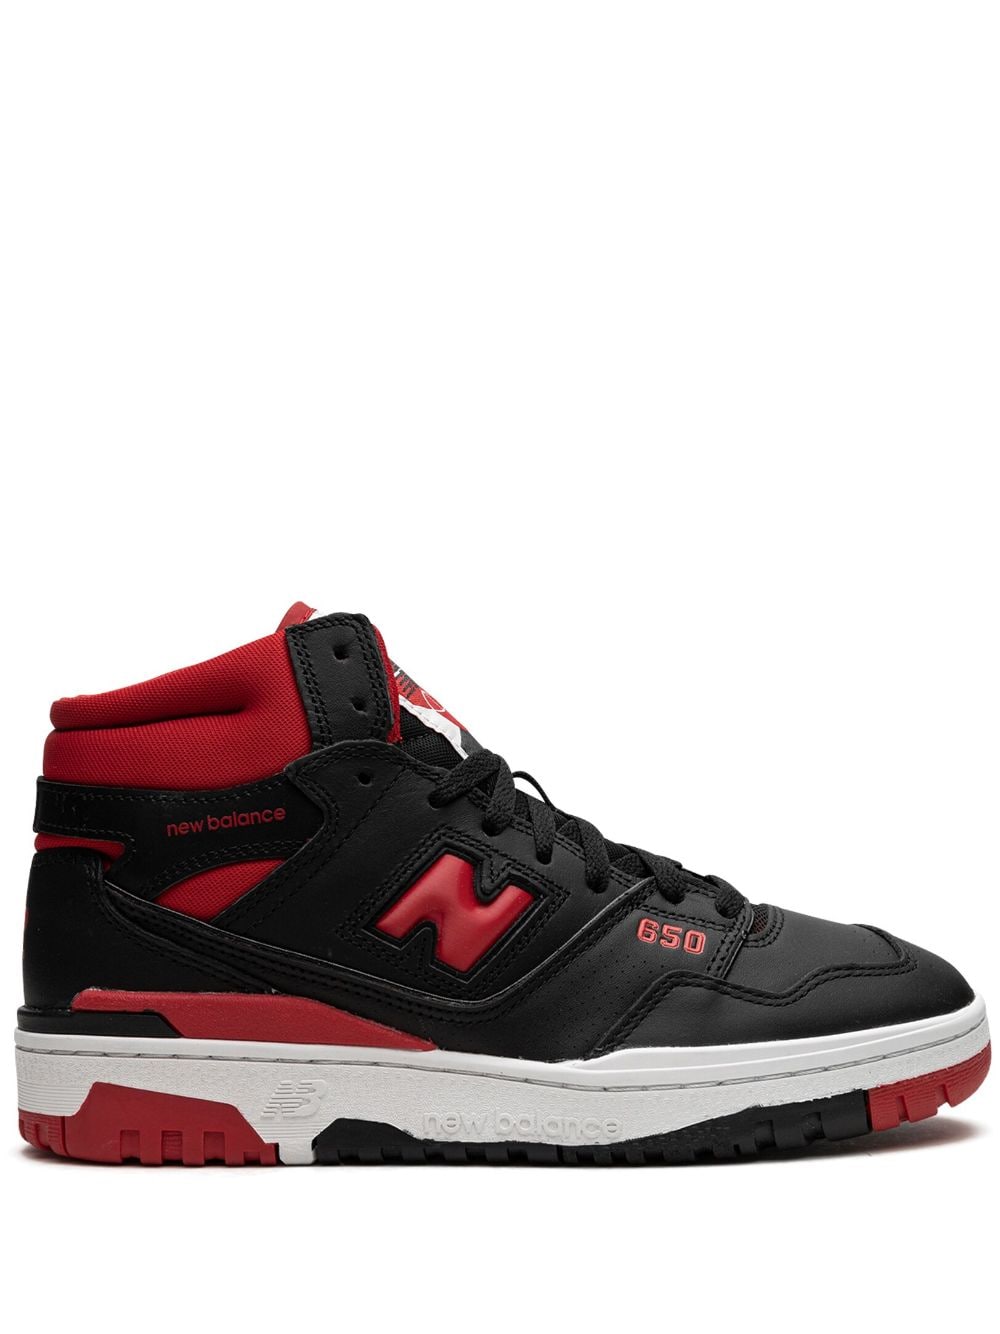 New Balance 650 "Bred" sneakers - Black